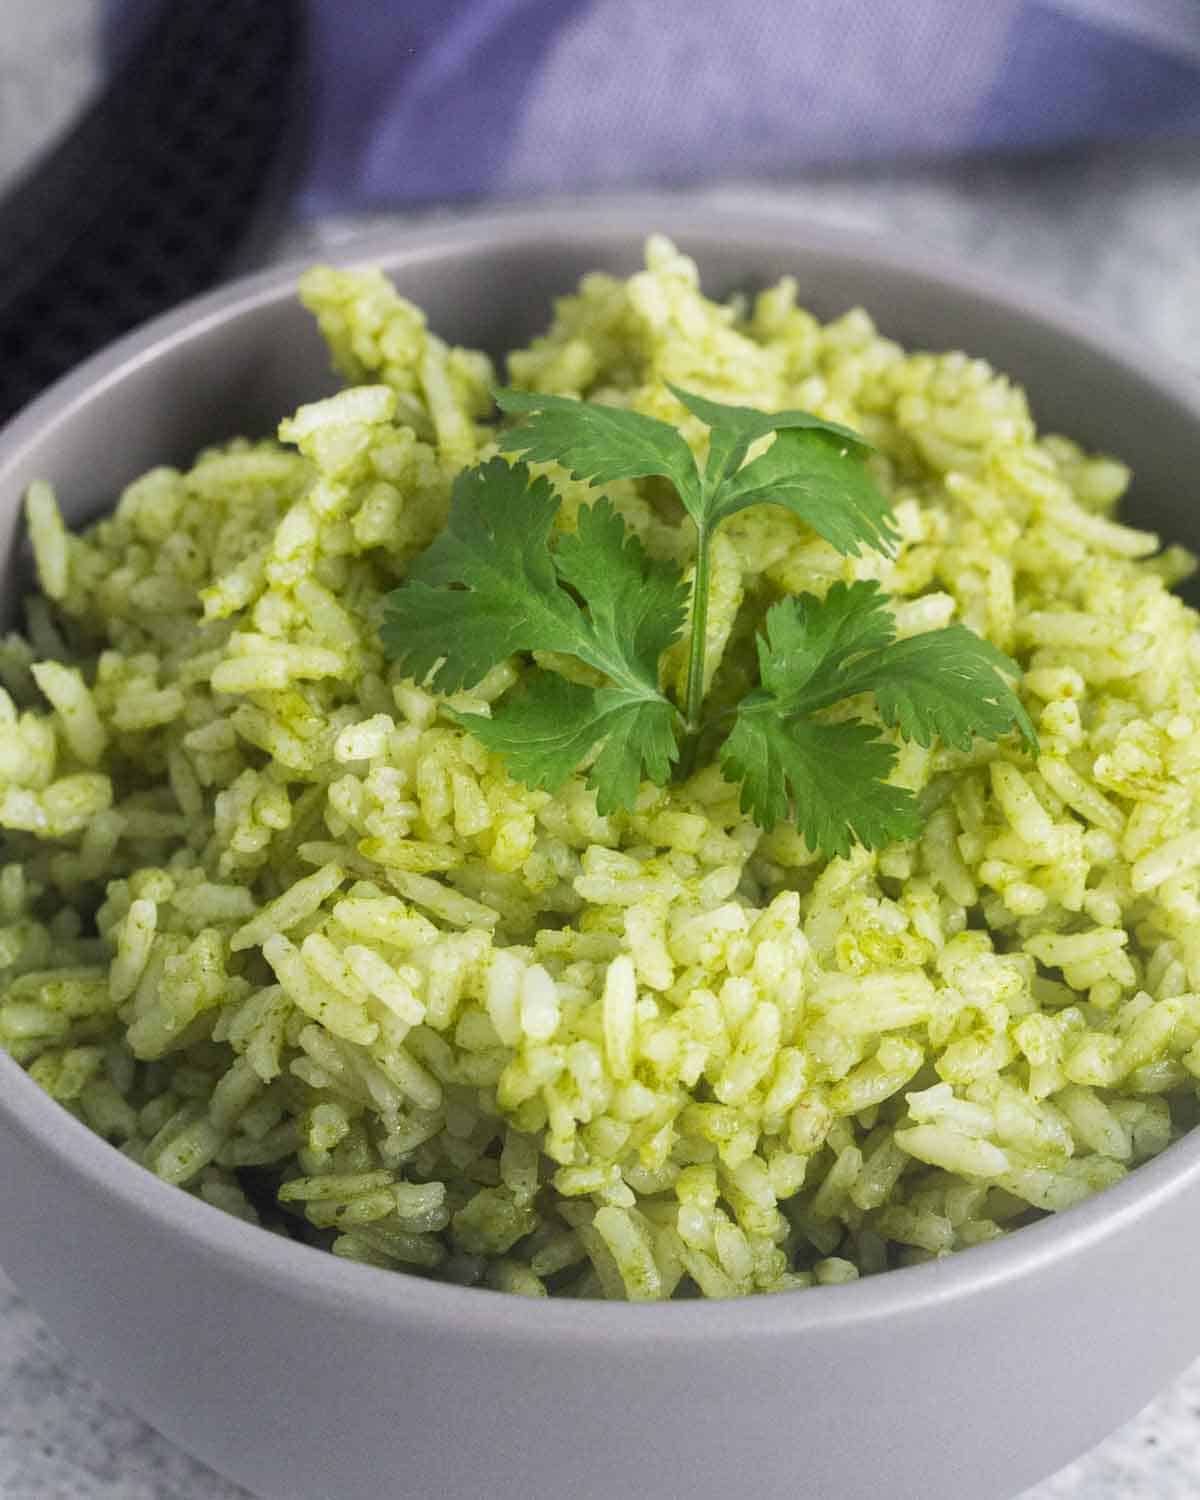 A closeup of a bowl with arroz verde (green rice) and cilantro leaves as garnish.